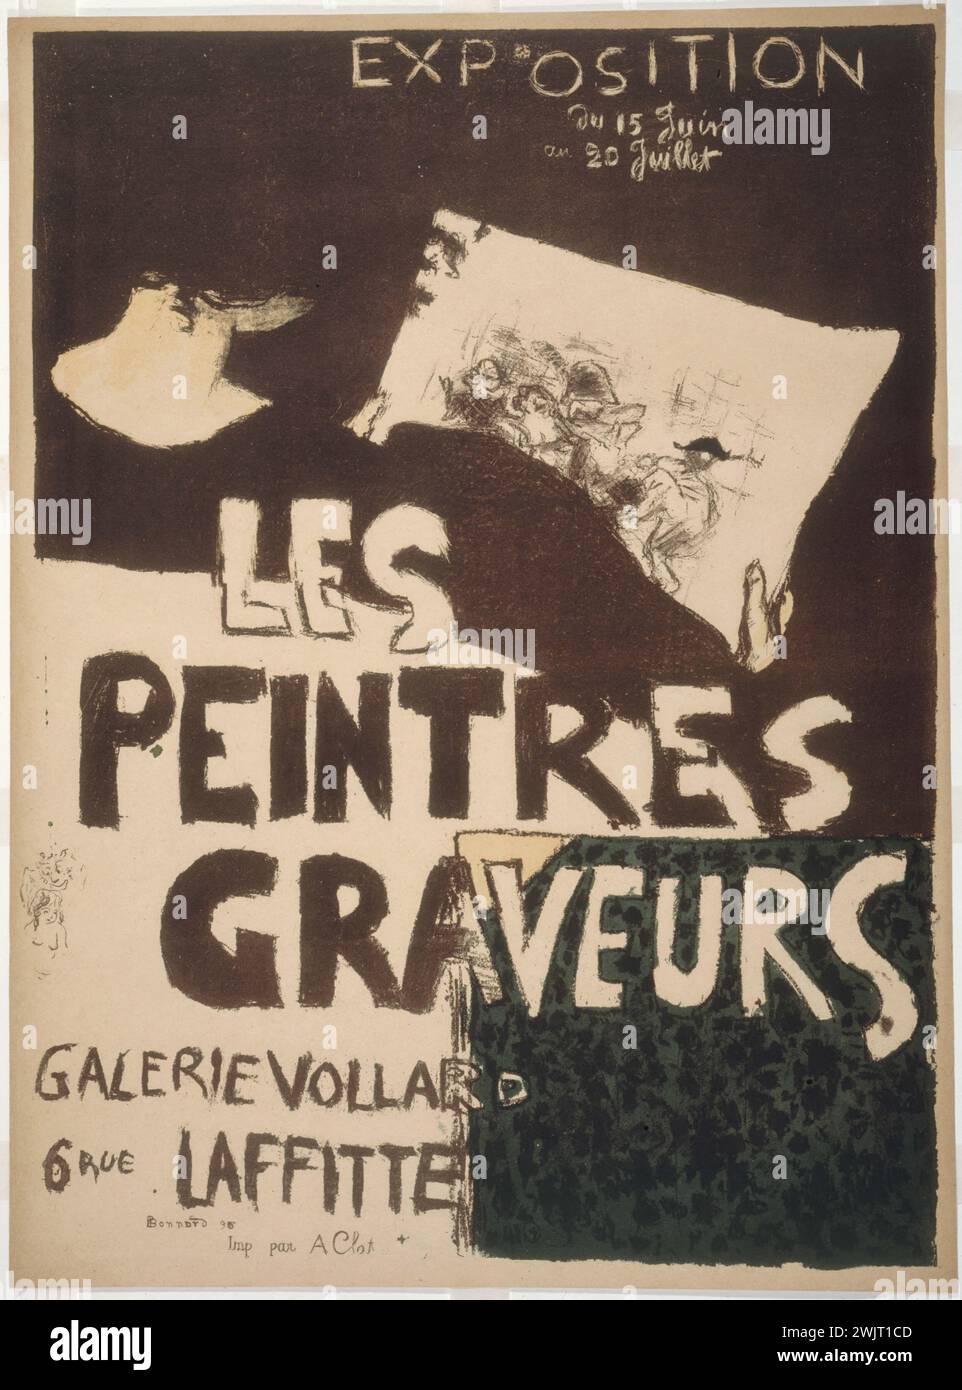 Pierre Bonnard (1867-1947). Poster of the exhibition for the first album of the Graveurs painters, edited by Vollard, 1896. Engraving. Museum of Fine Arts of the City of Paris, Petit Palais. 24263-2 Poster, exhibition, Vollard gallery, engraver, painter, first album, engraving Stock Photo